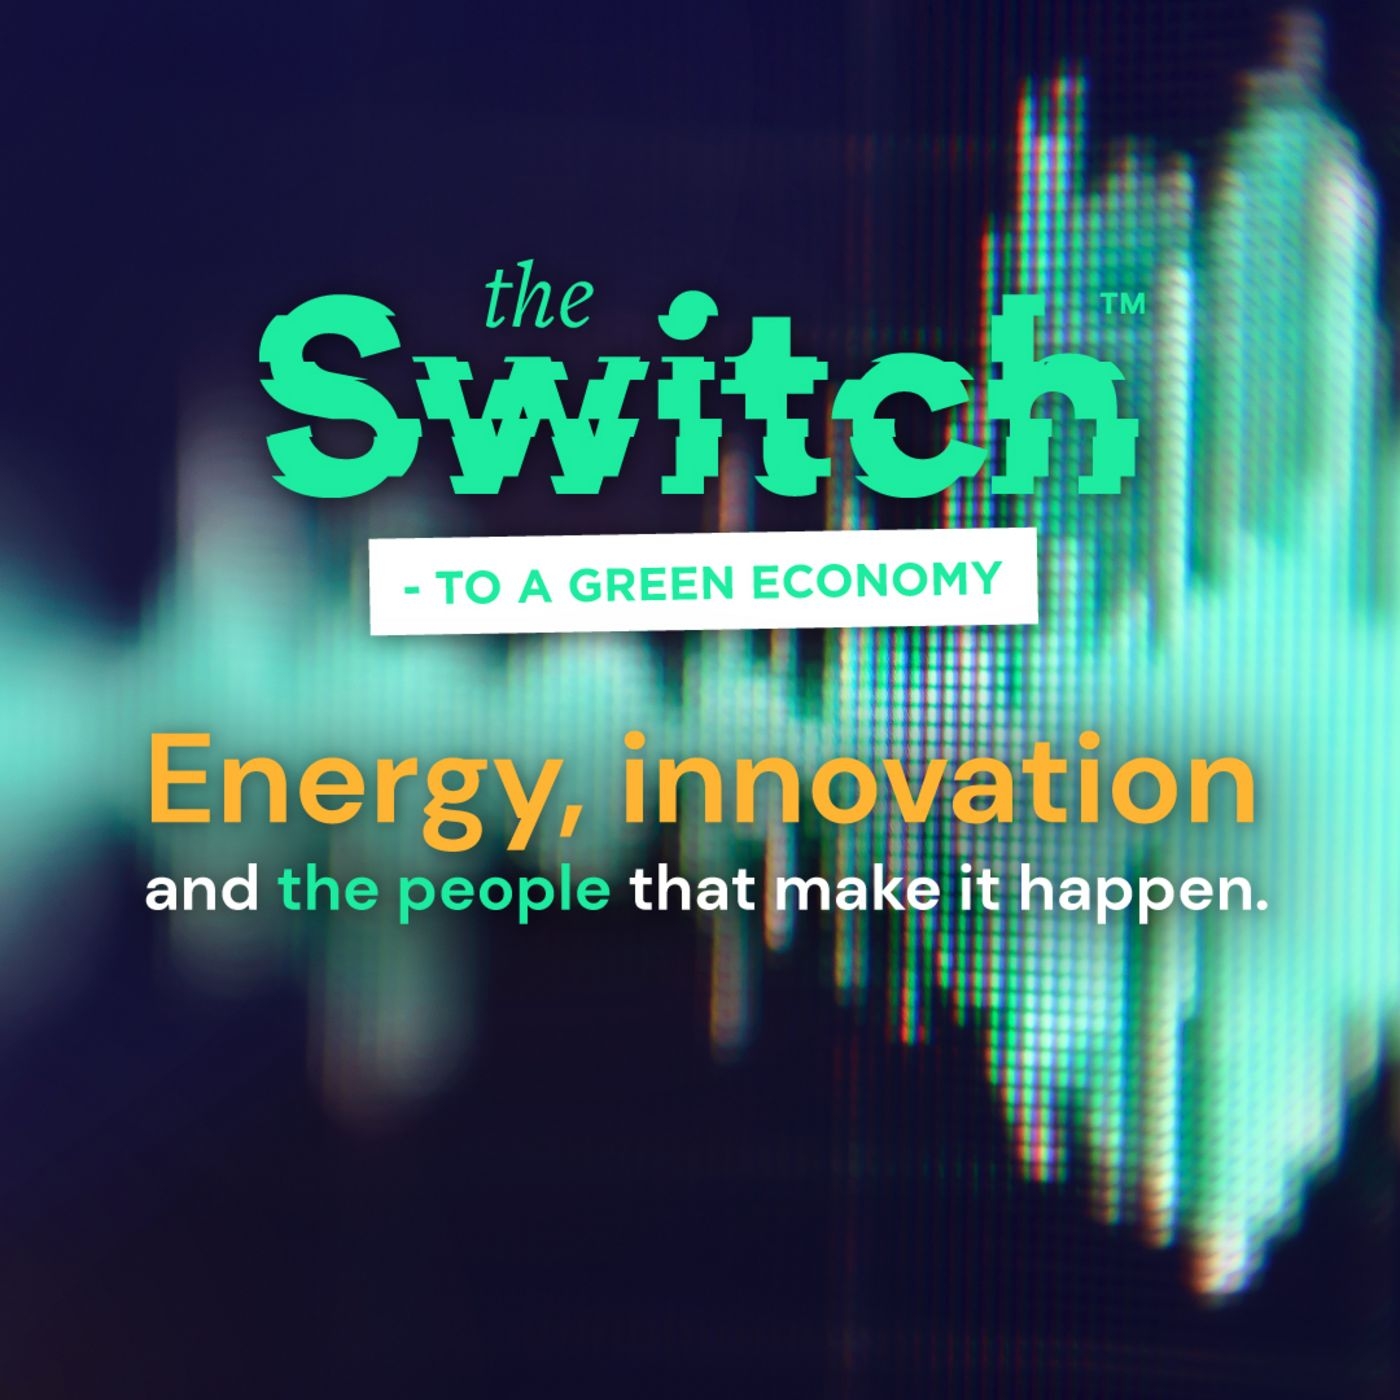 The Switch - to a green economy